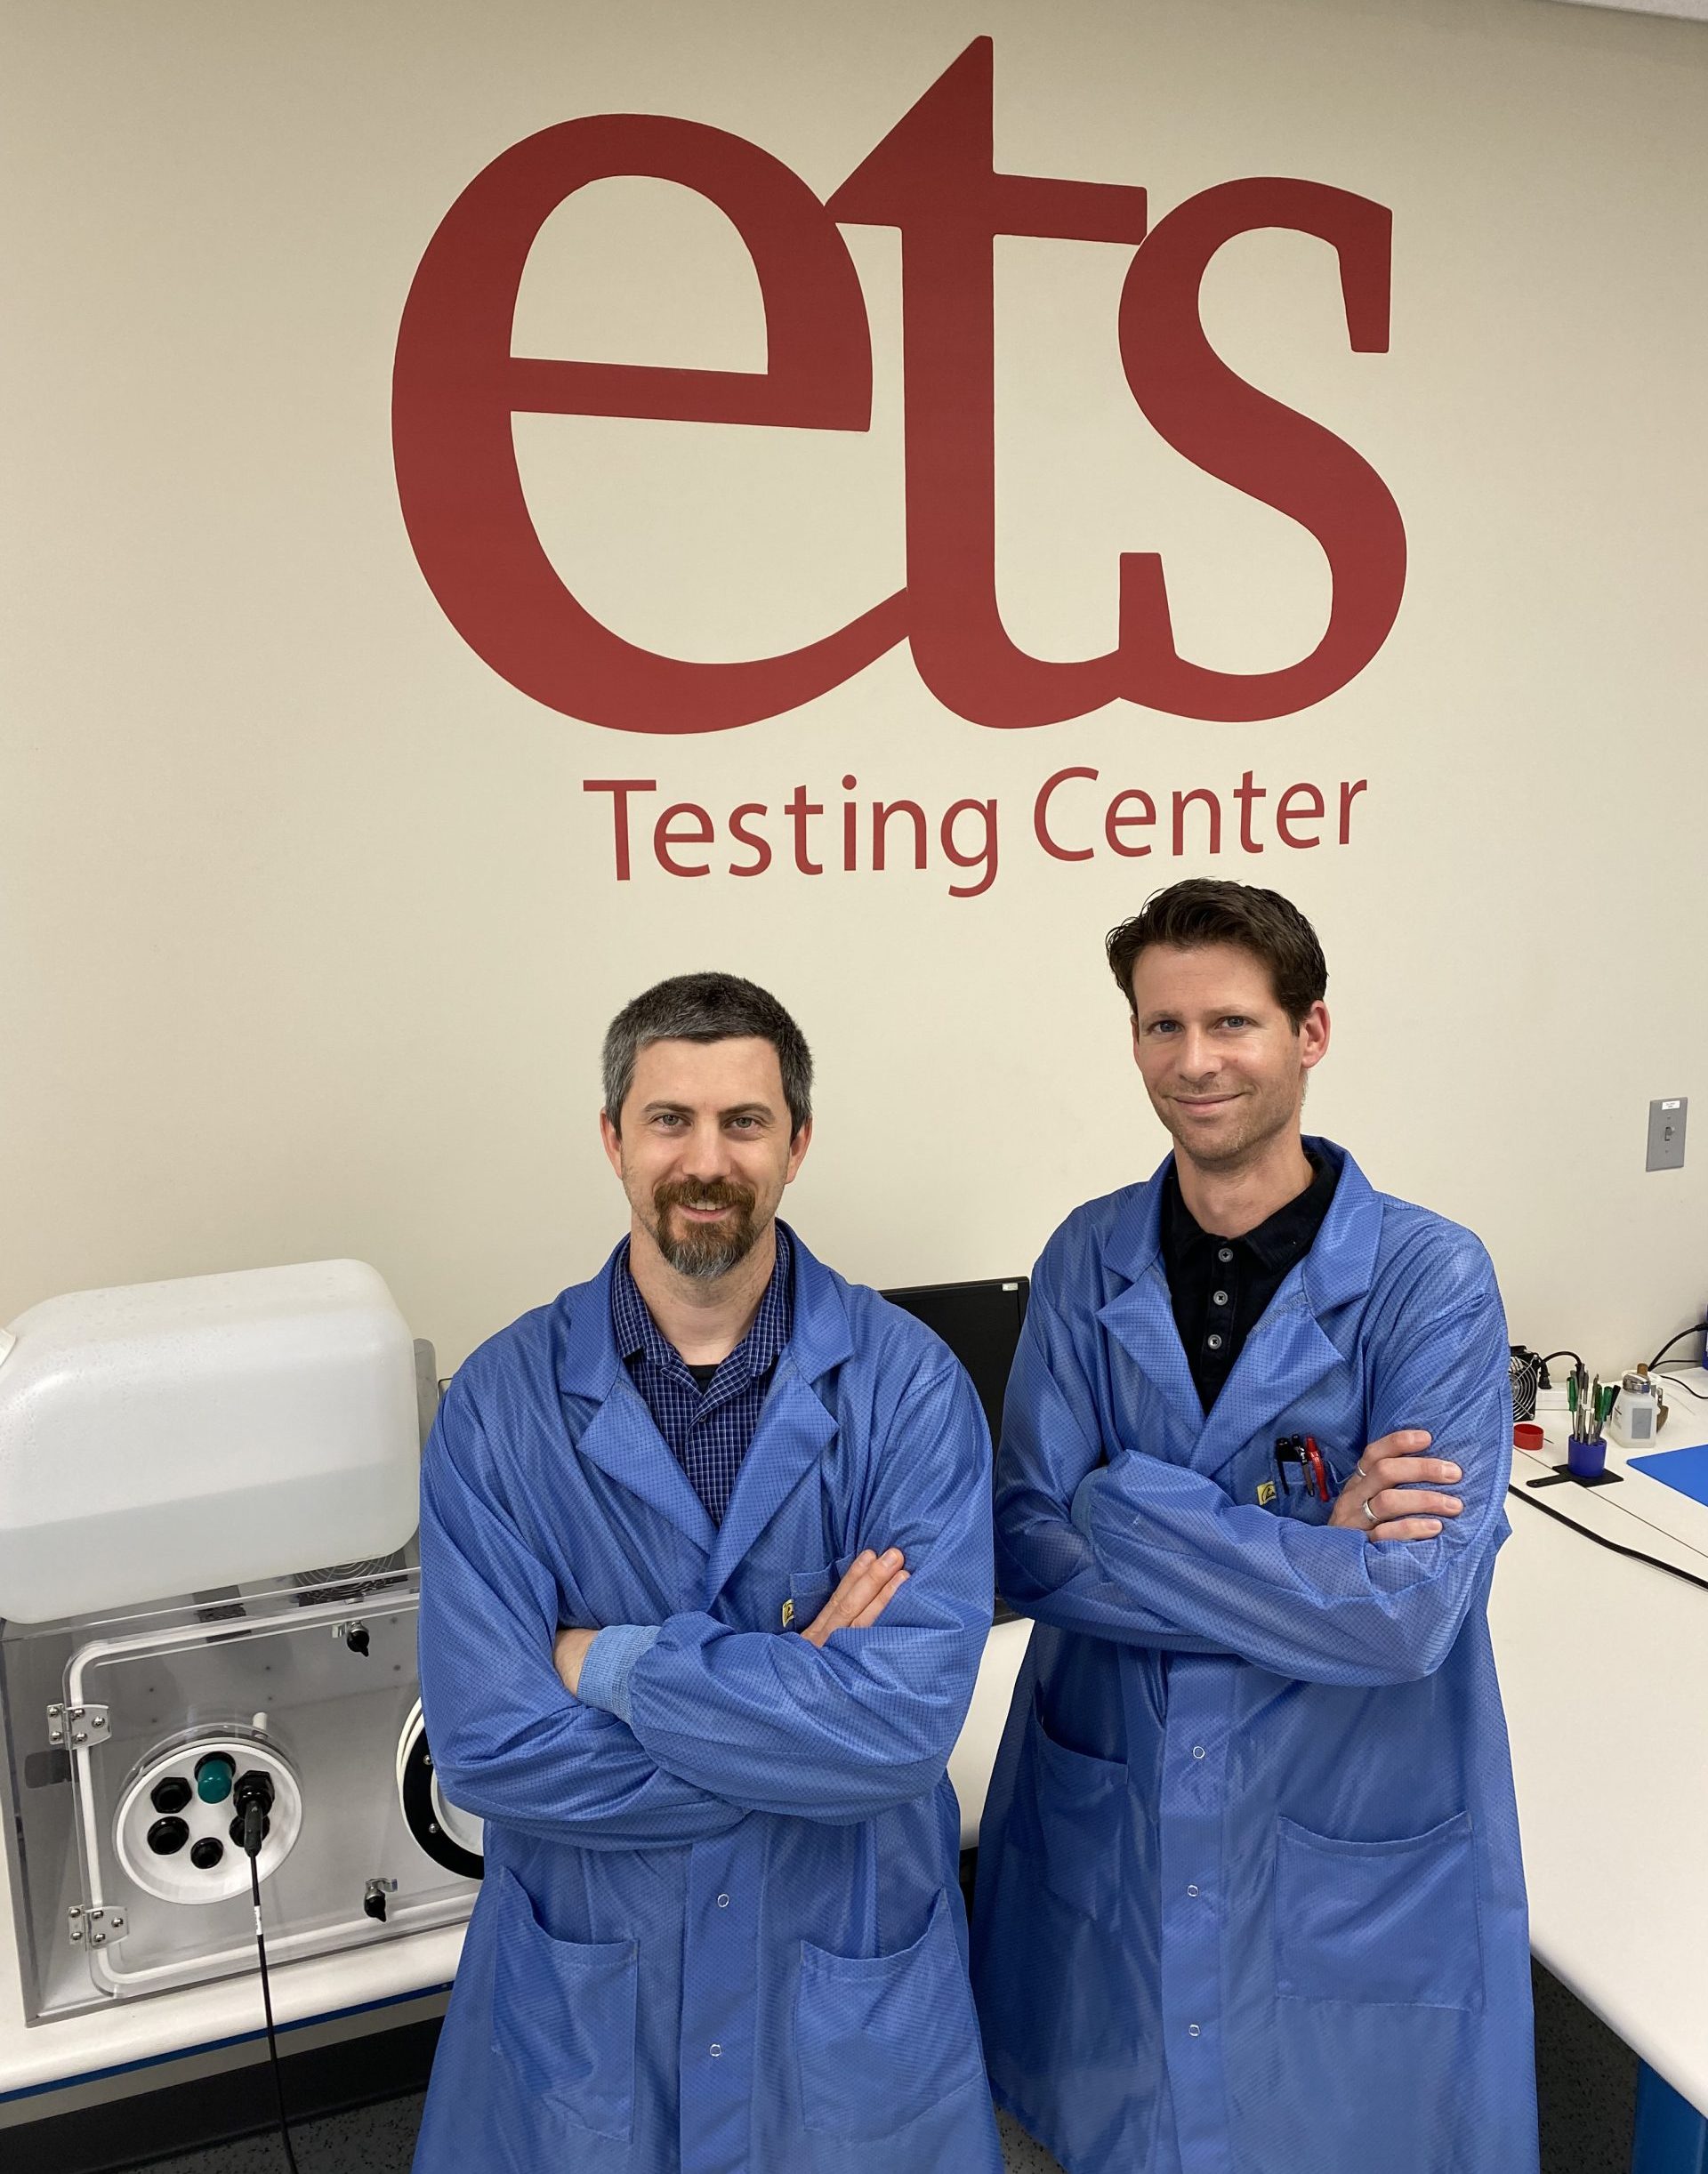 Electro-Tech Systems, Inc. (ETS) Achieves First Product Qualification Laboratory Certification from EOS/ESD Association